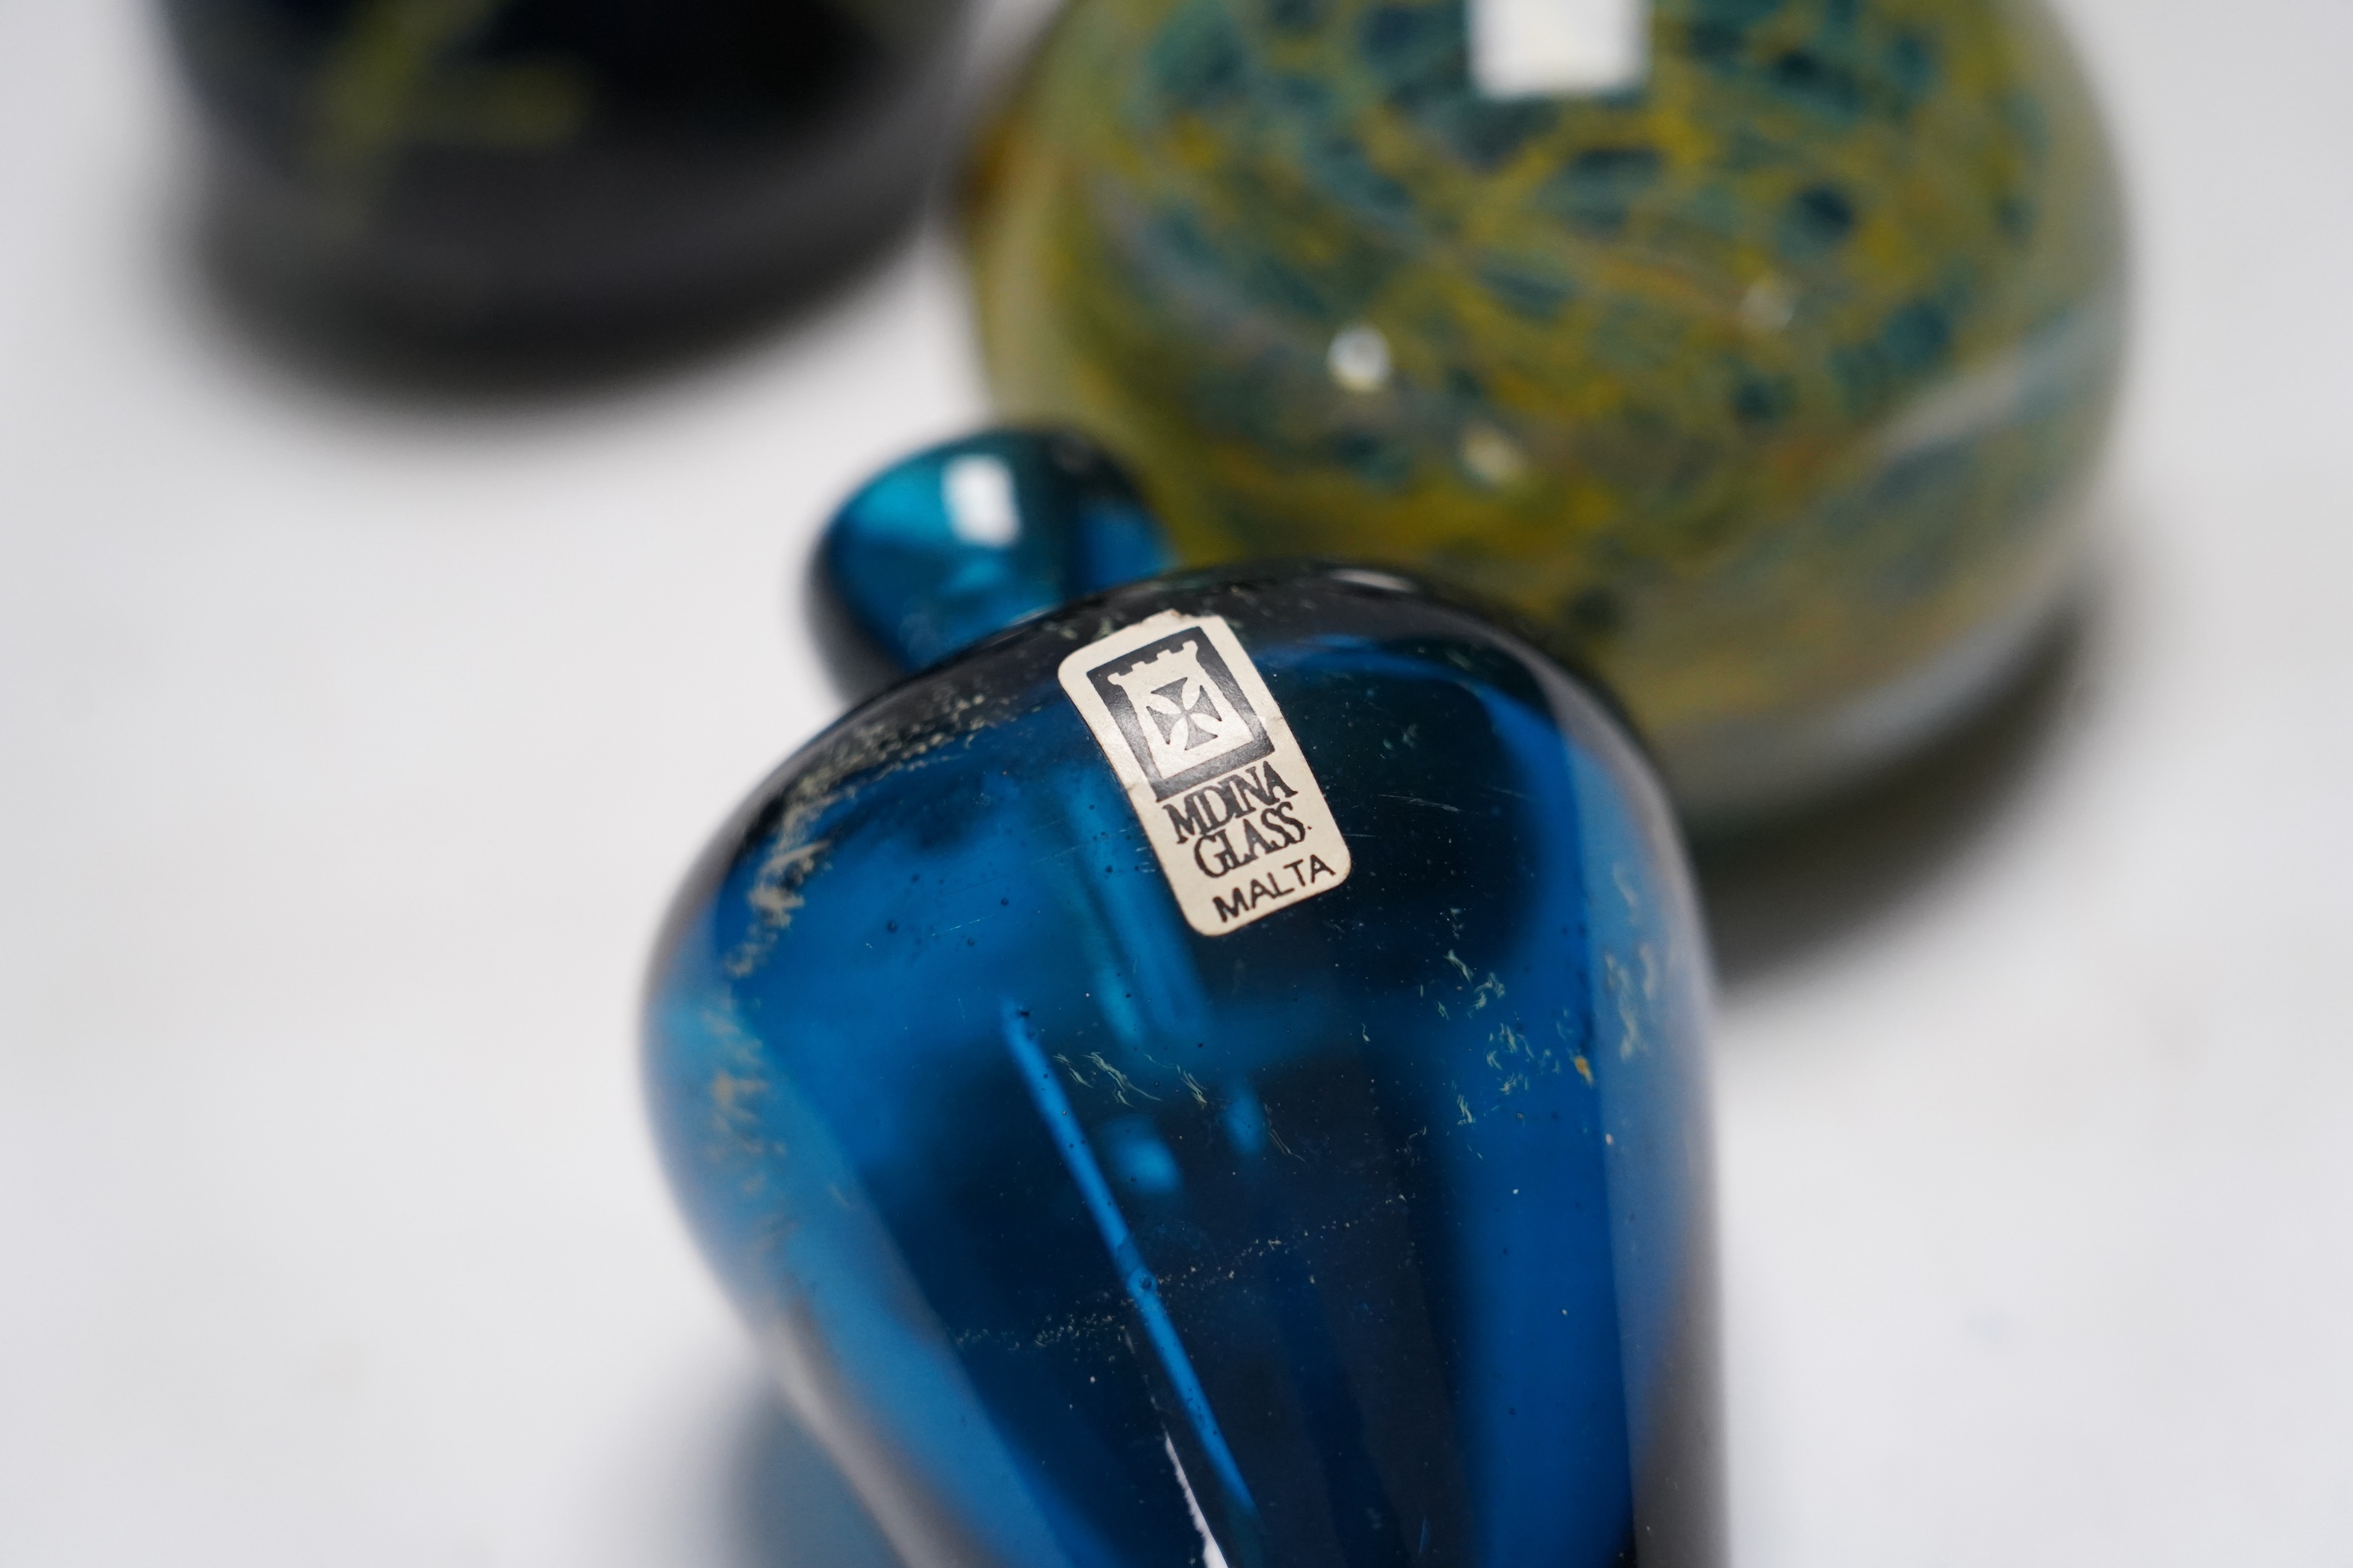 A collection of thirty pieces of Mdina glassware, comprising paperweights and vases, largest 13cm high